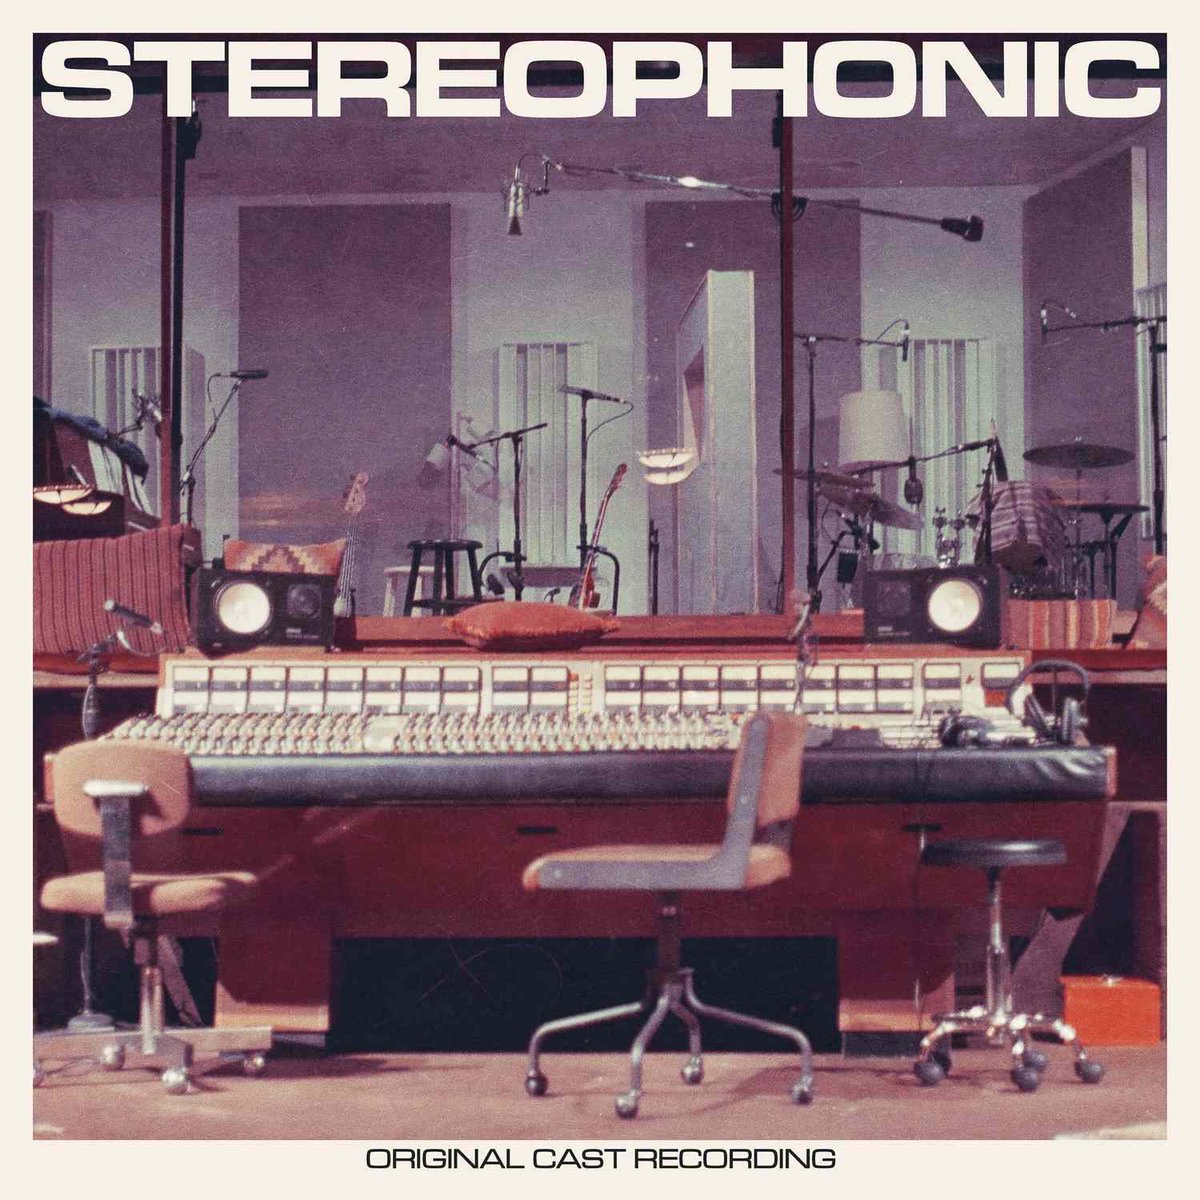 The amazing thing about the Stereophonic album is how it manages to capture the feeling of the entire show by giving us so much that isn’t even part of the show at all. Truly one of the most unique and most wonderful cast recordings out there!